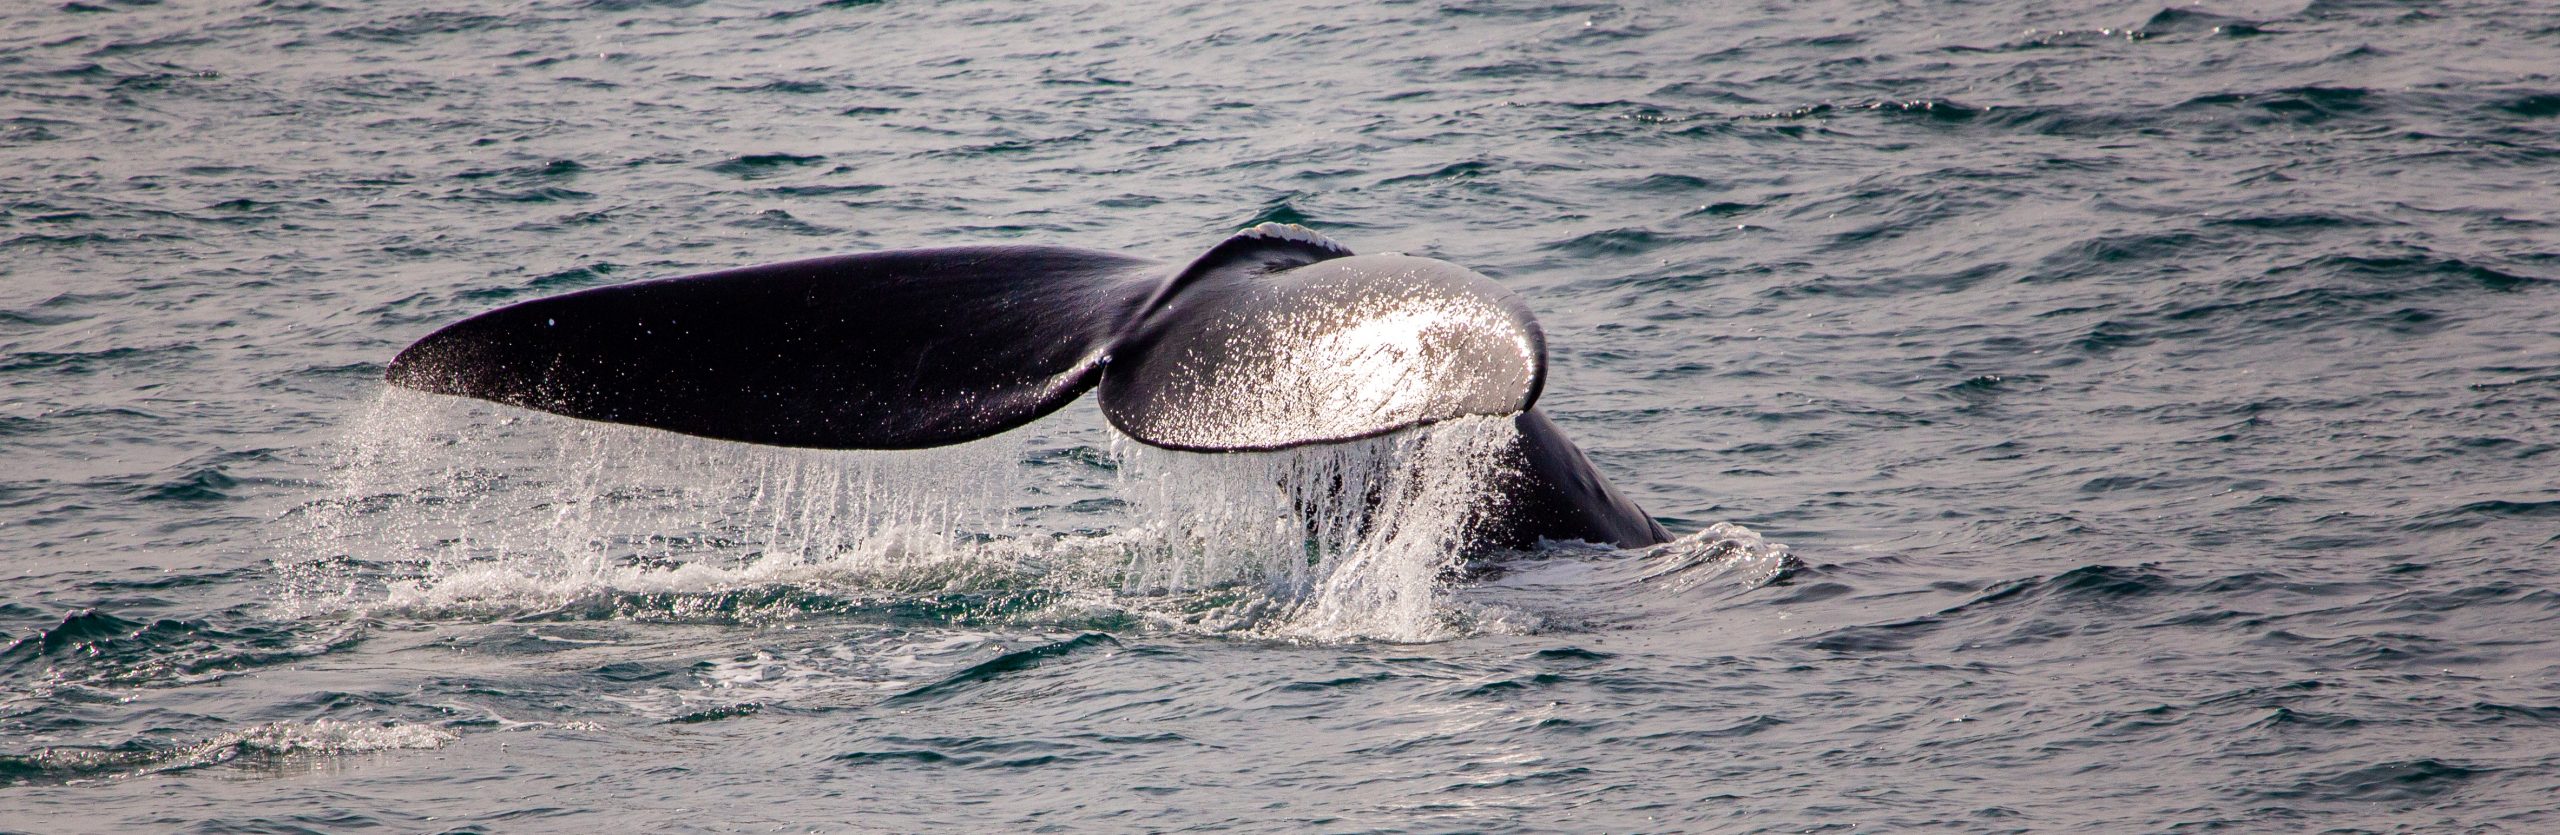 5 Actions to Take for World Whale Day (and Beyond!) New England Aquarium